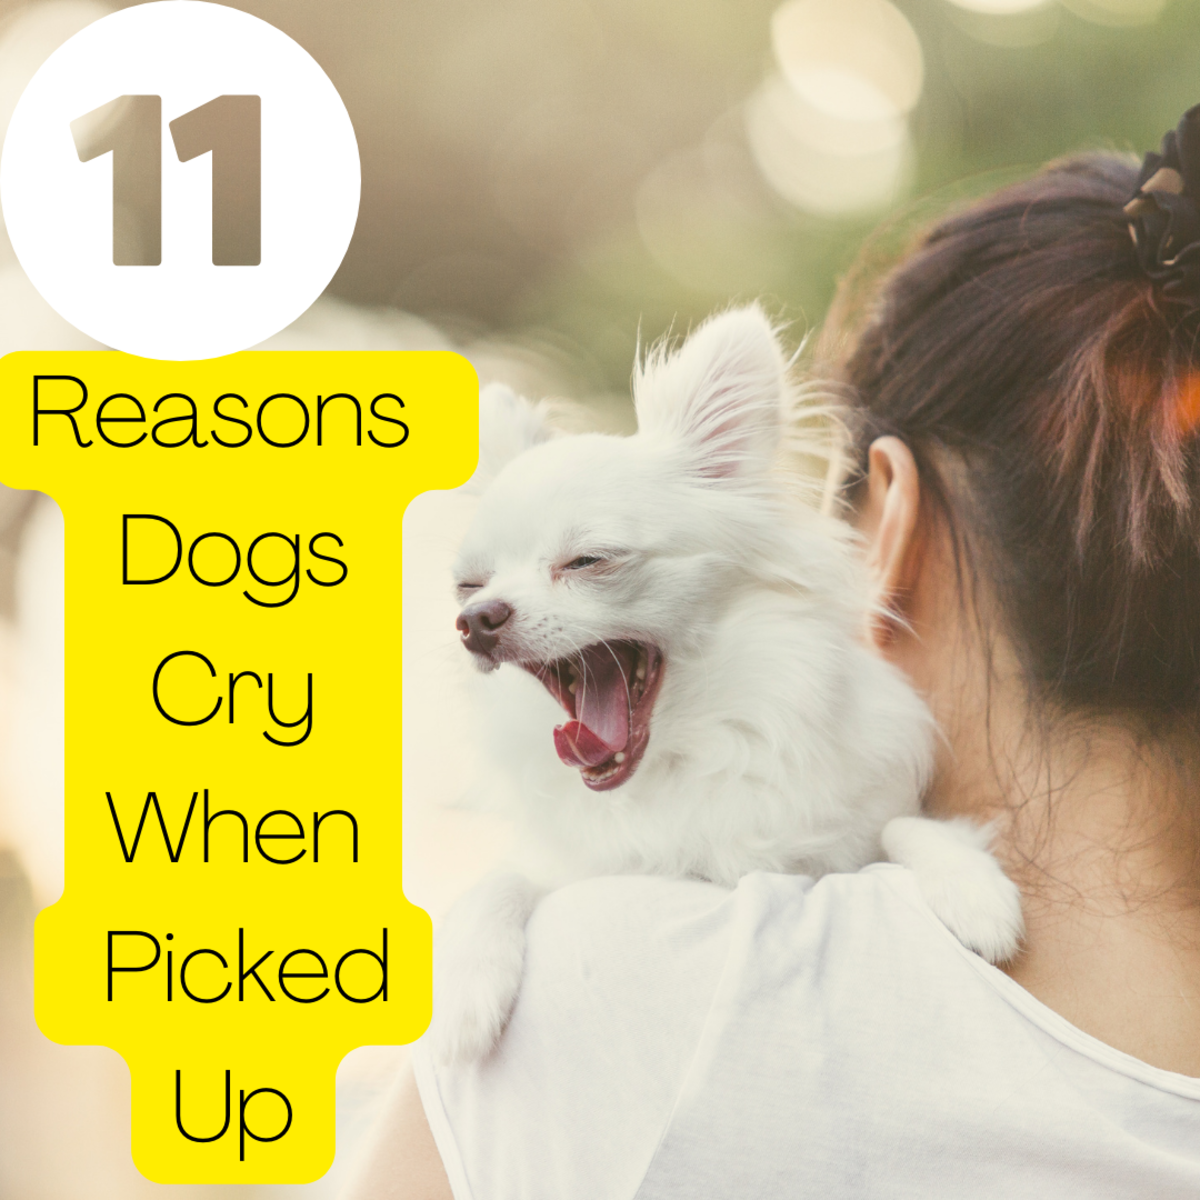 Does your dog cry when picked up?